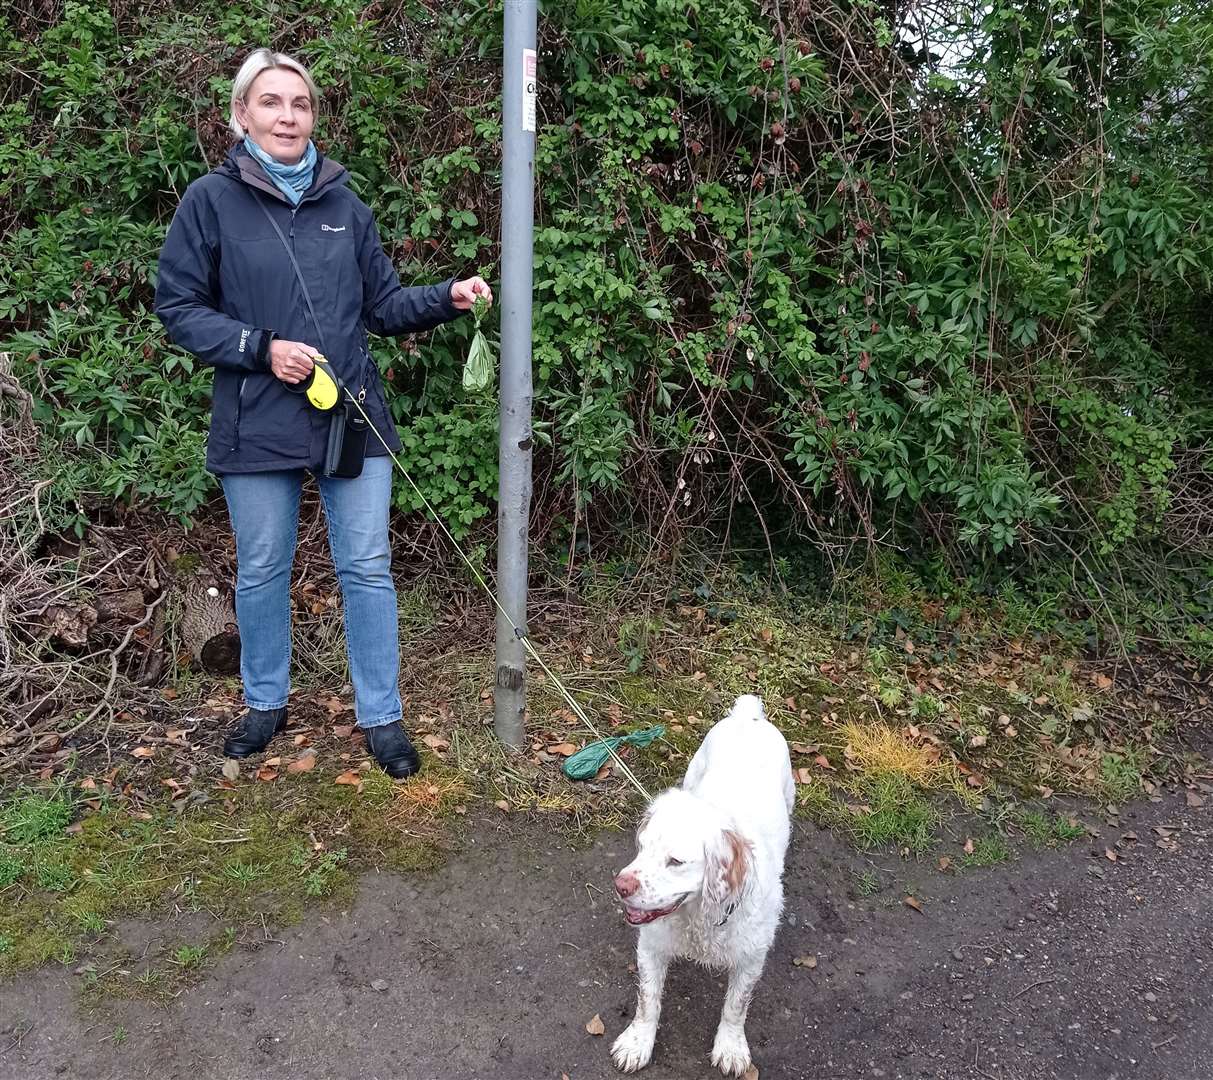 Dog walkers now have nowhere to put their pet waste